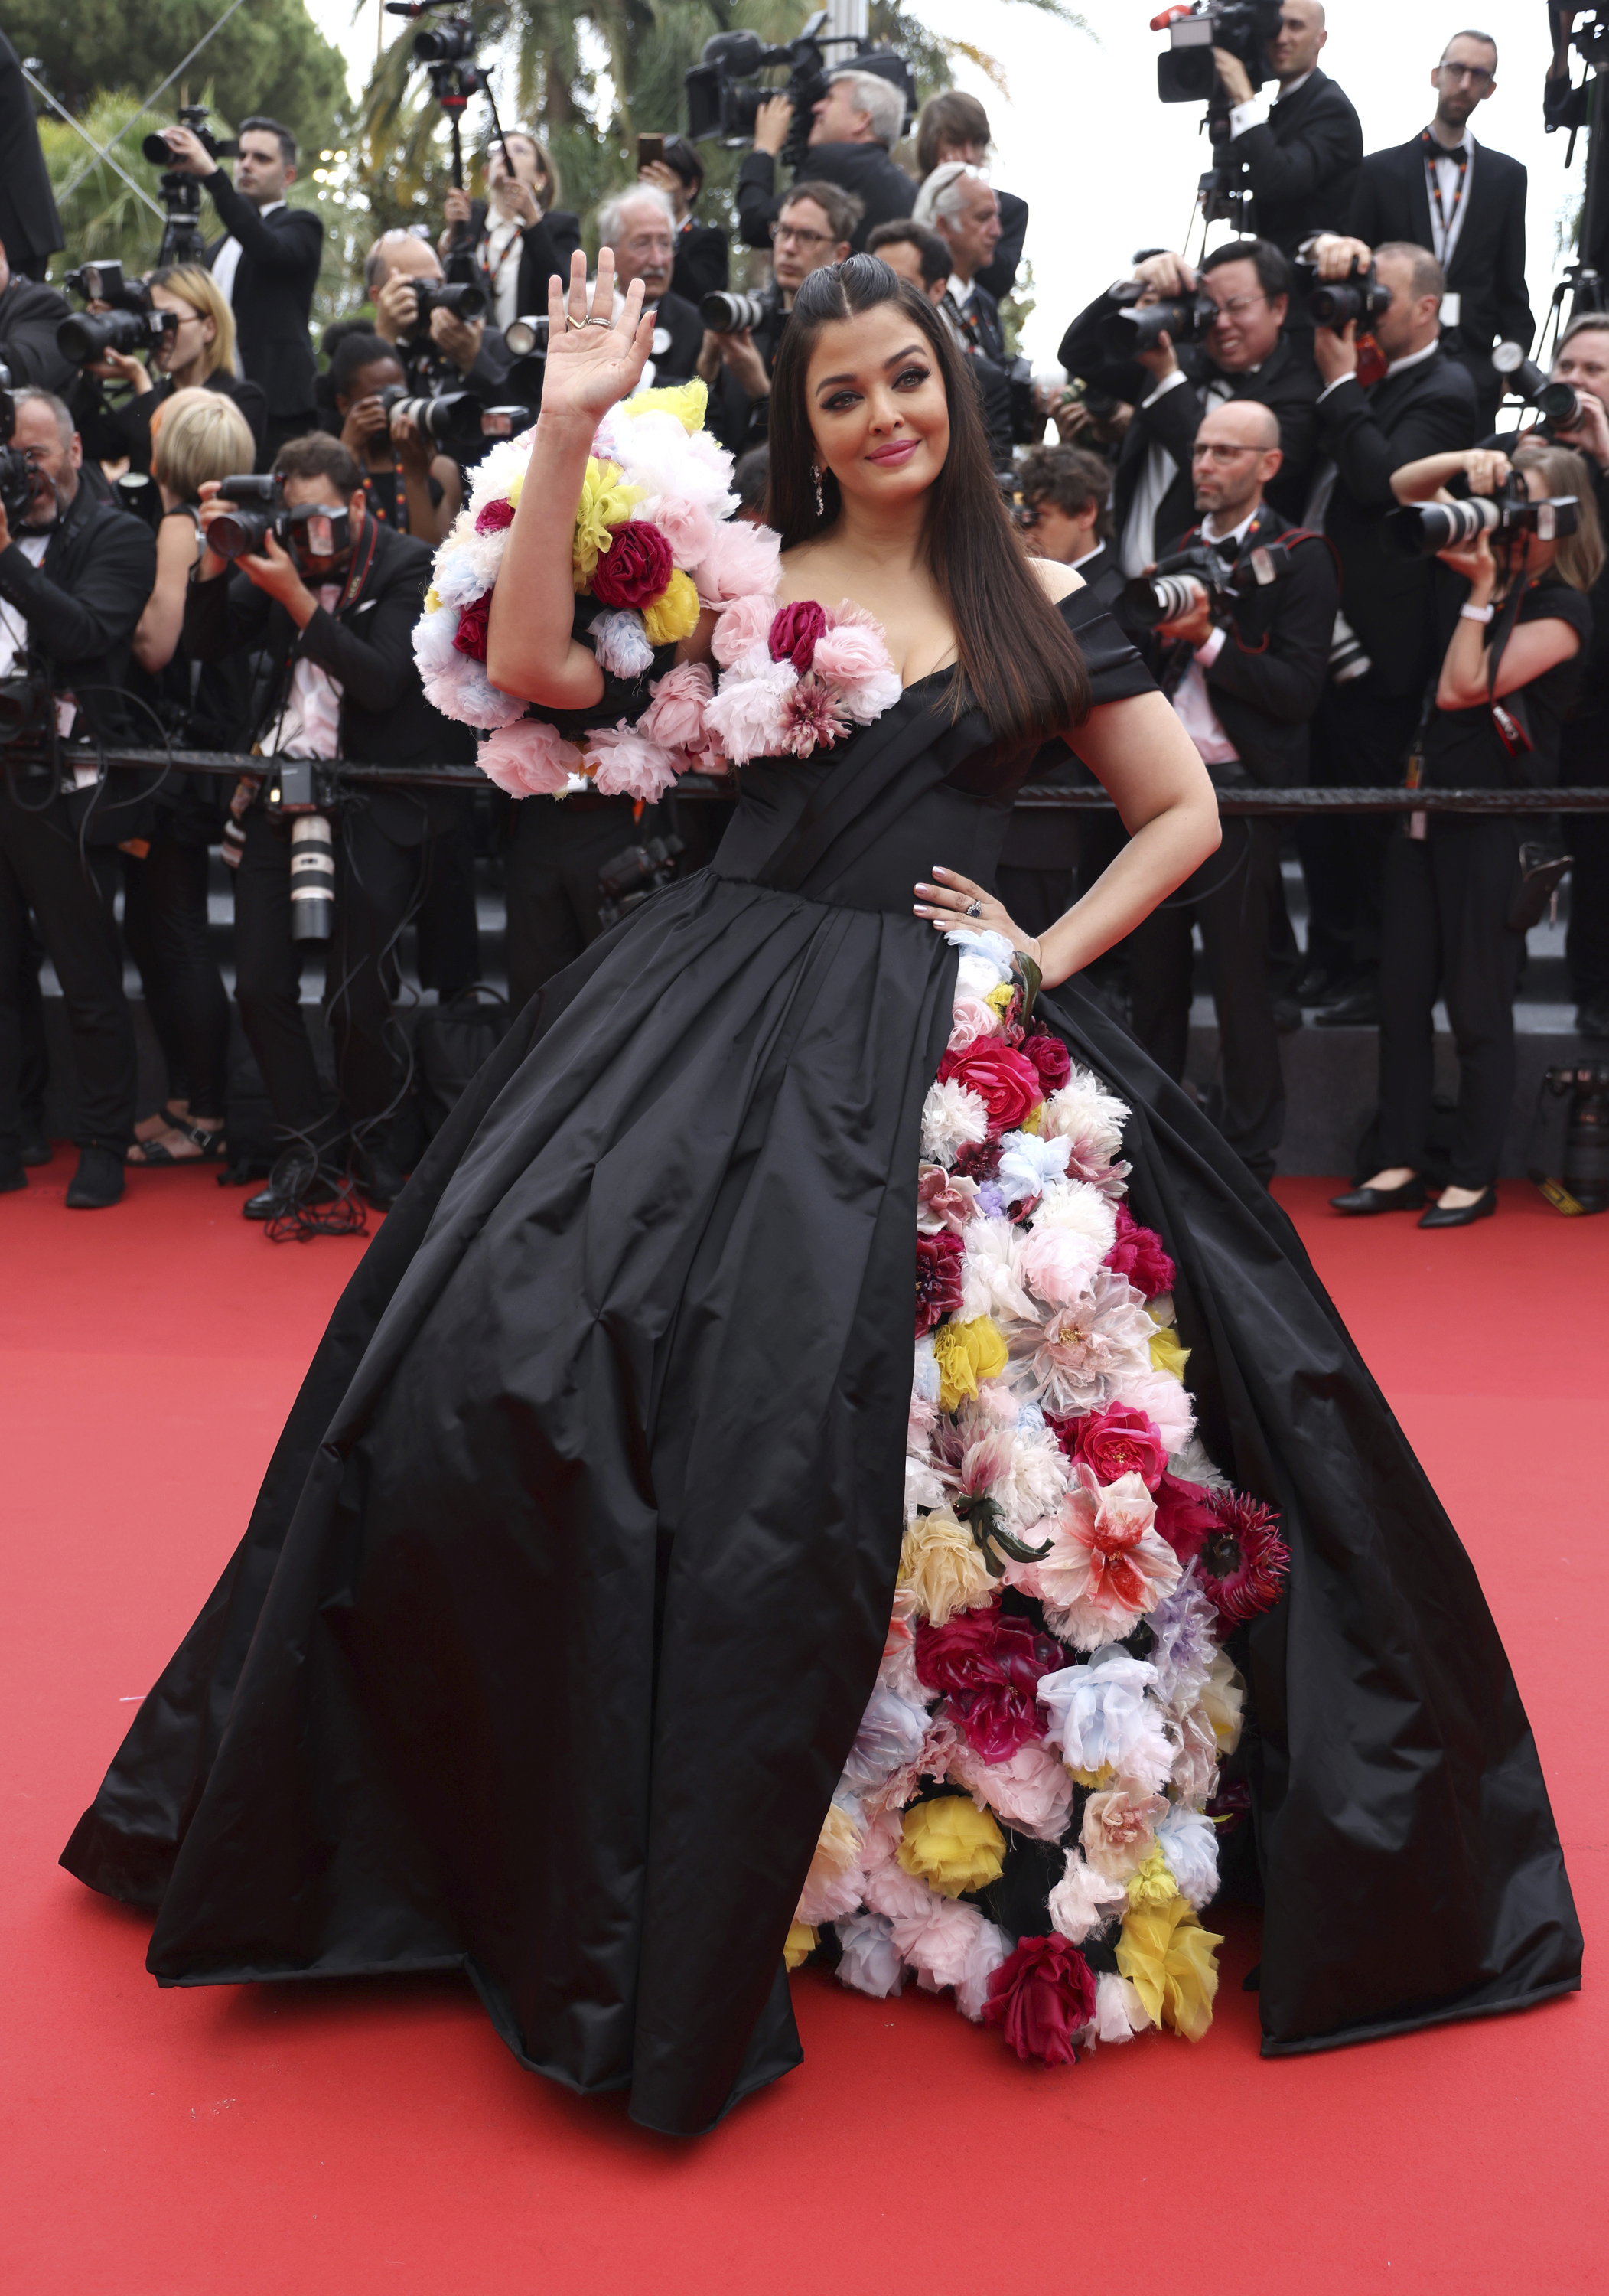 Aishwarya Rai Bachchan wearing a black puffy gown with tulle flowers spilling out of a slit in the skirt and making up a sleeve